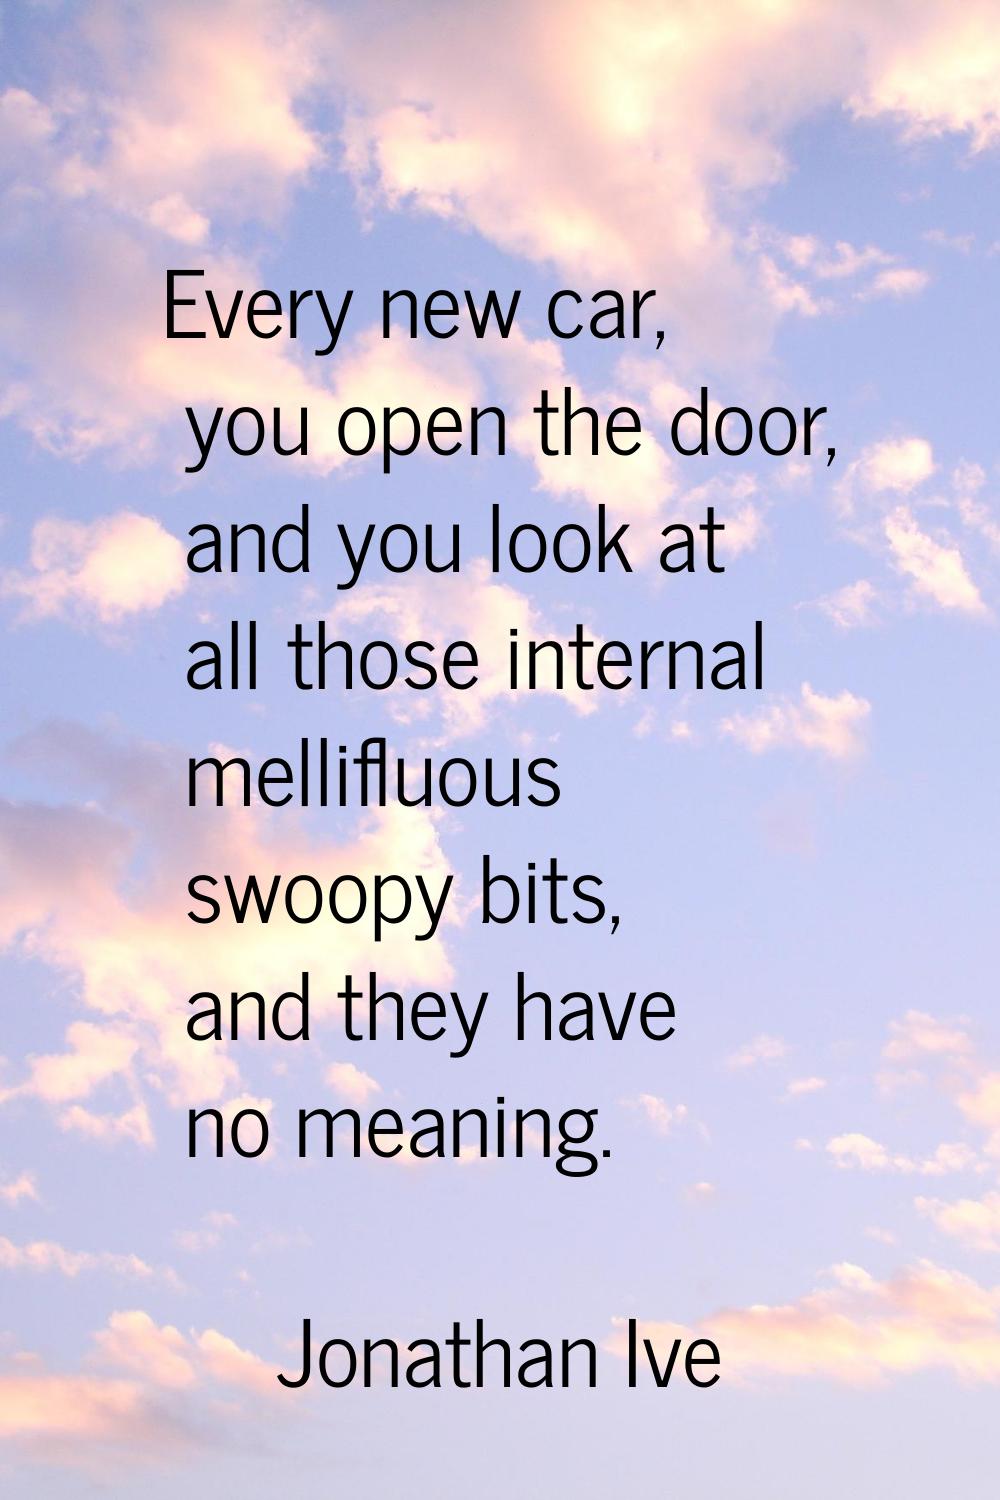 Every new car, you open the door, and you look at all those internal mellifluous swoopy bits, and t